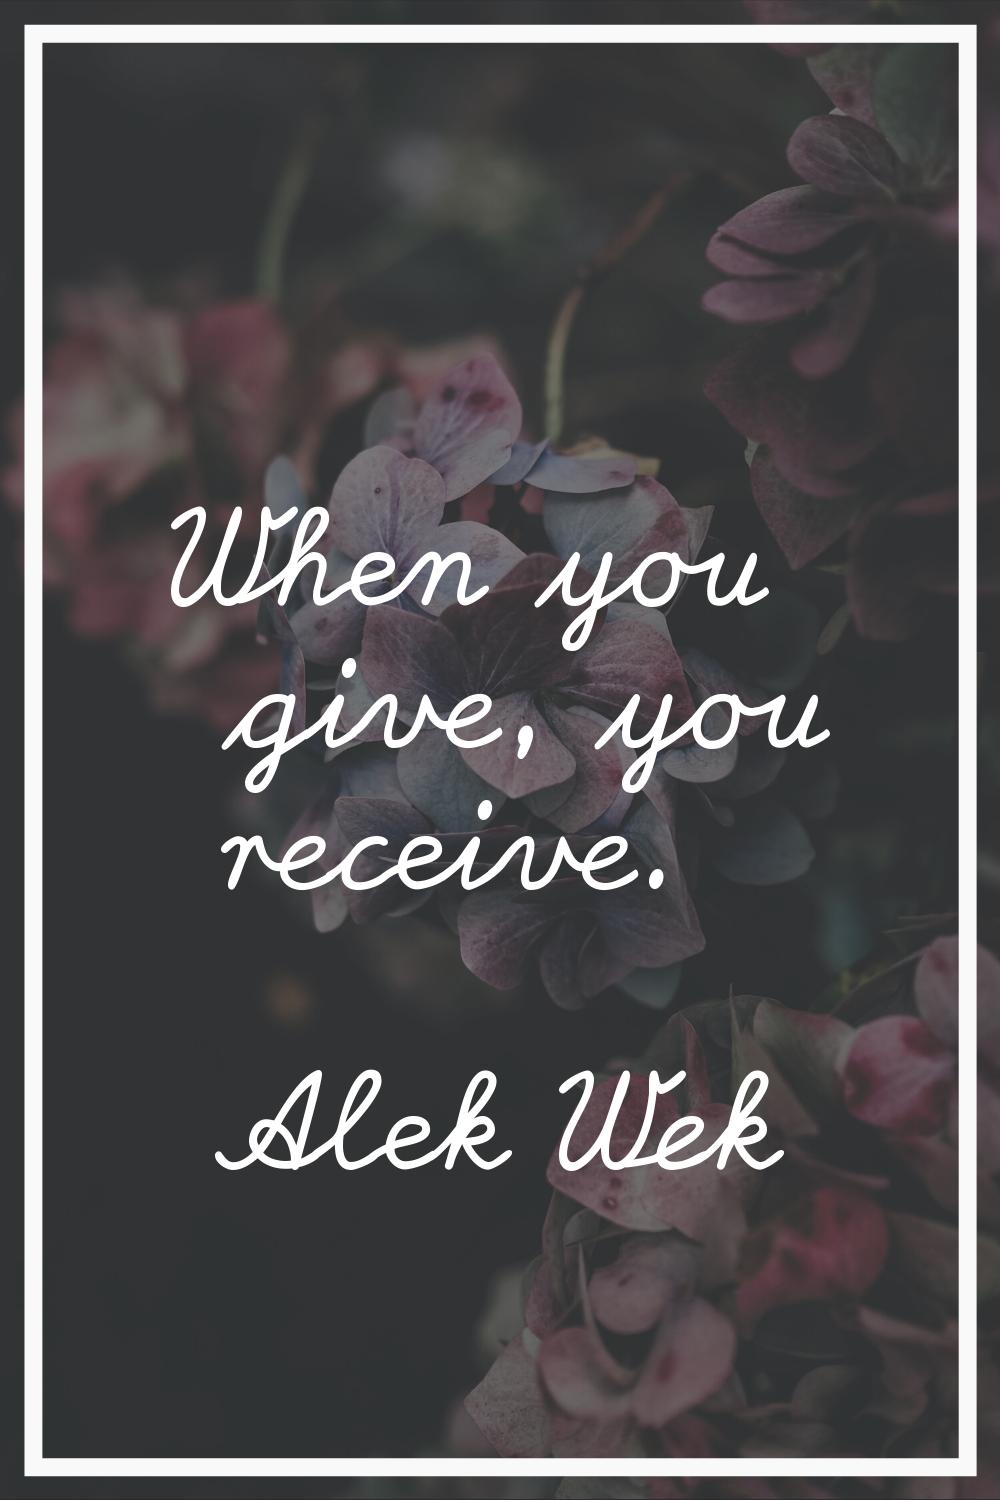 When you give, you receive.